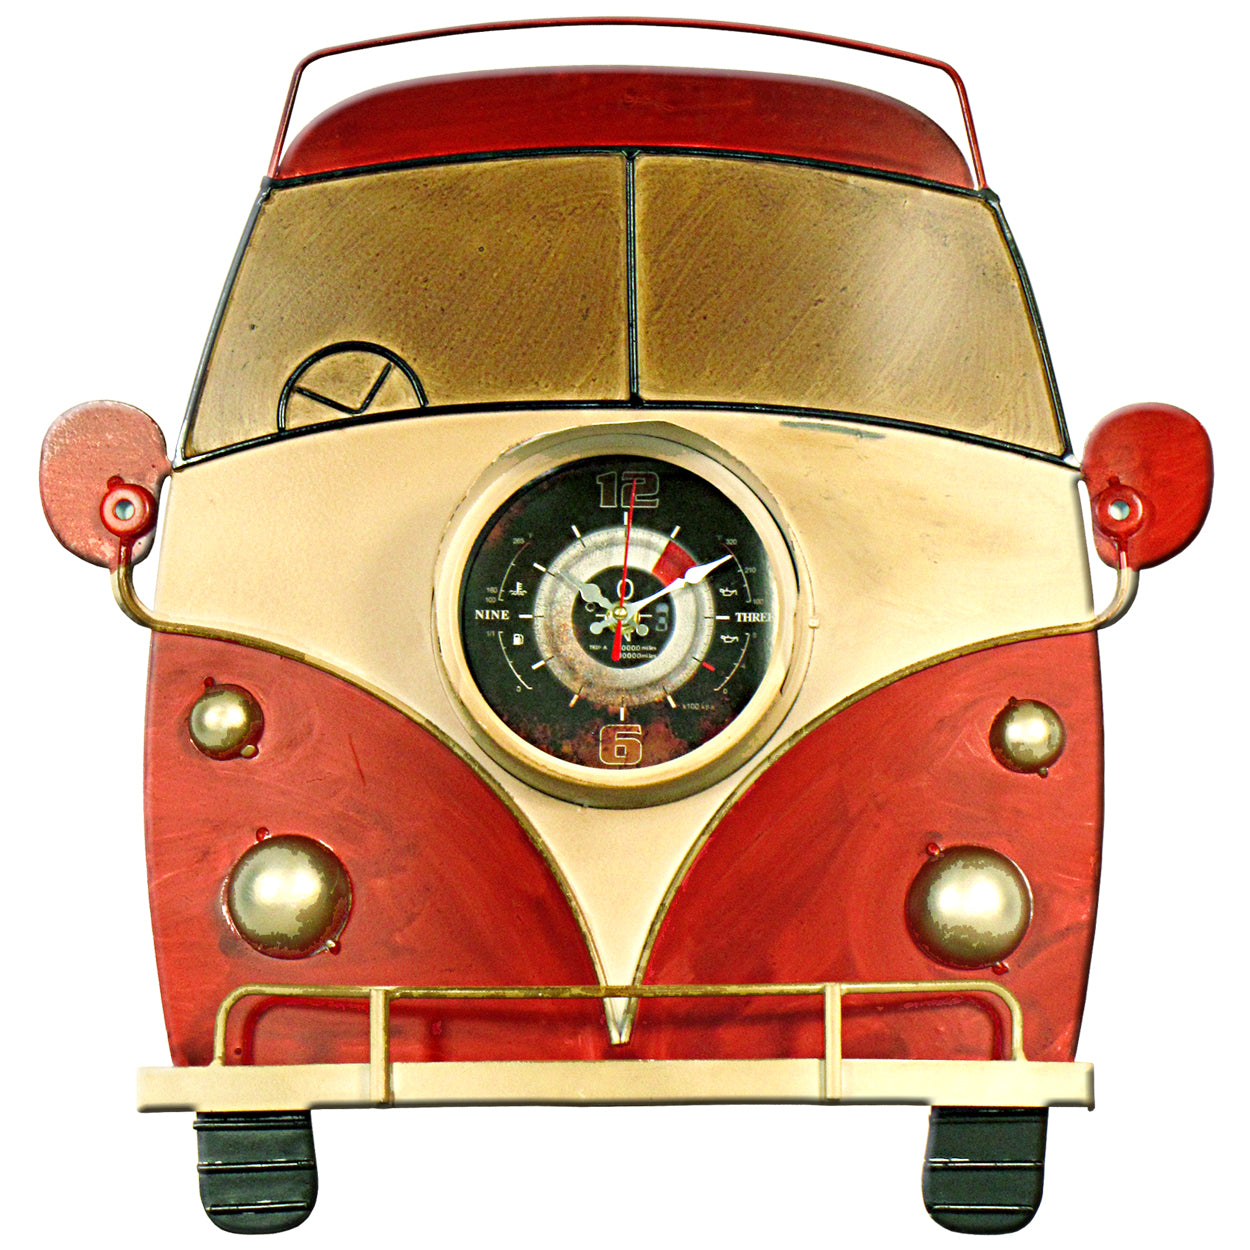 2070161: Red Bus Wall Clock